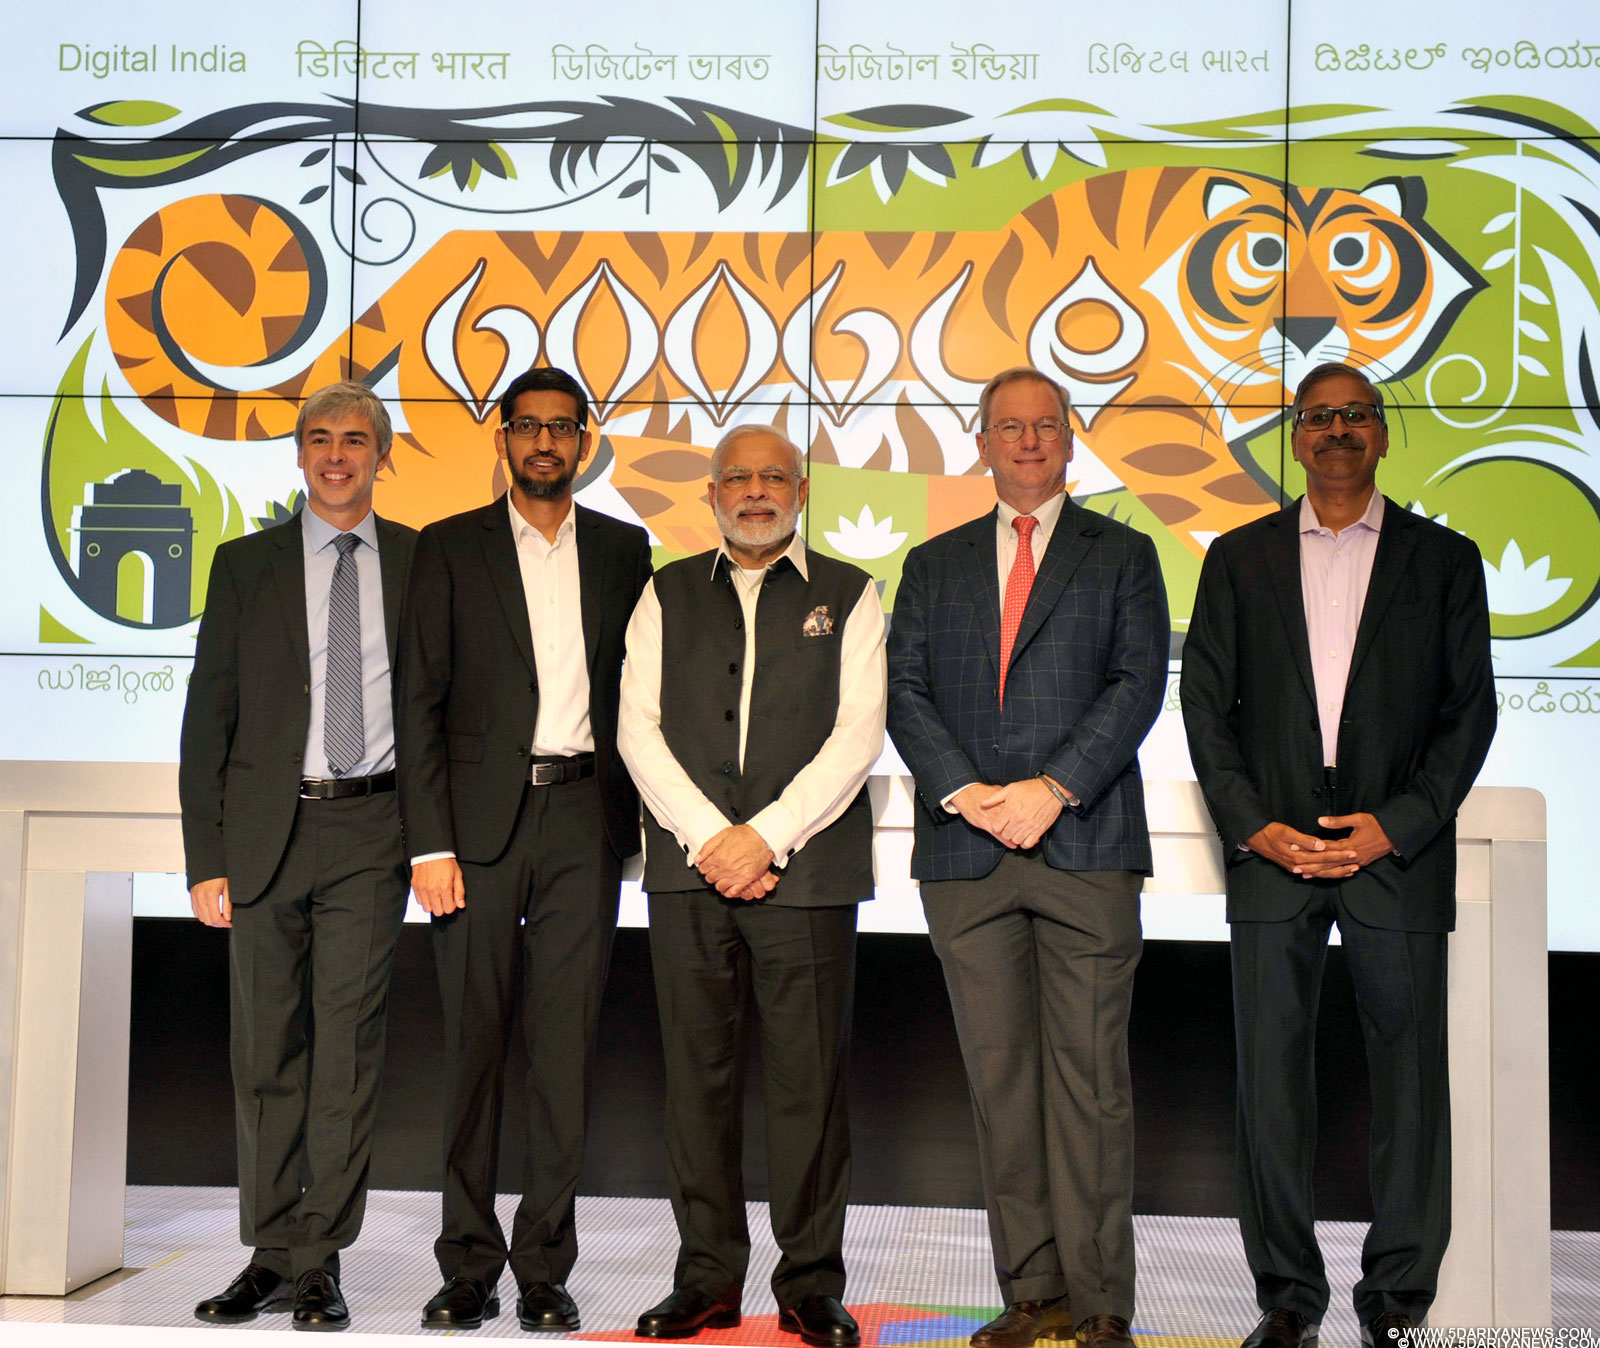 The Prime Minister, Shri Narendra Modi in a group photograph with the Google Officials at Google (Alphabet) campus, in Silicon Valley, California on September 27, 2015.